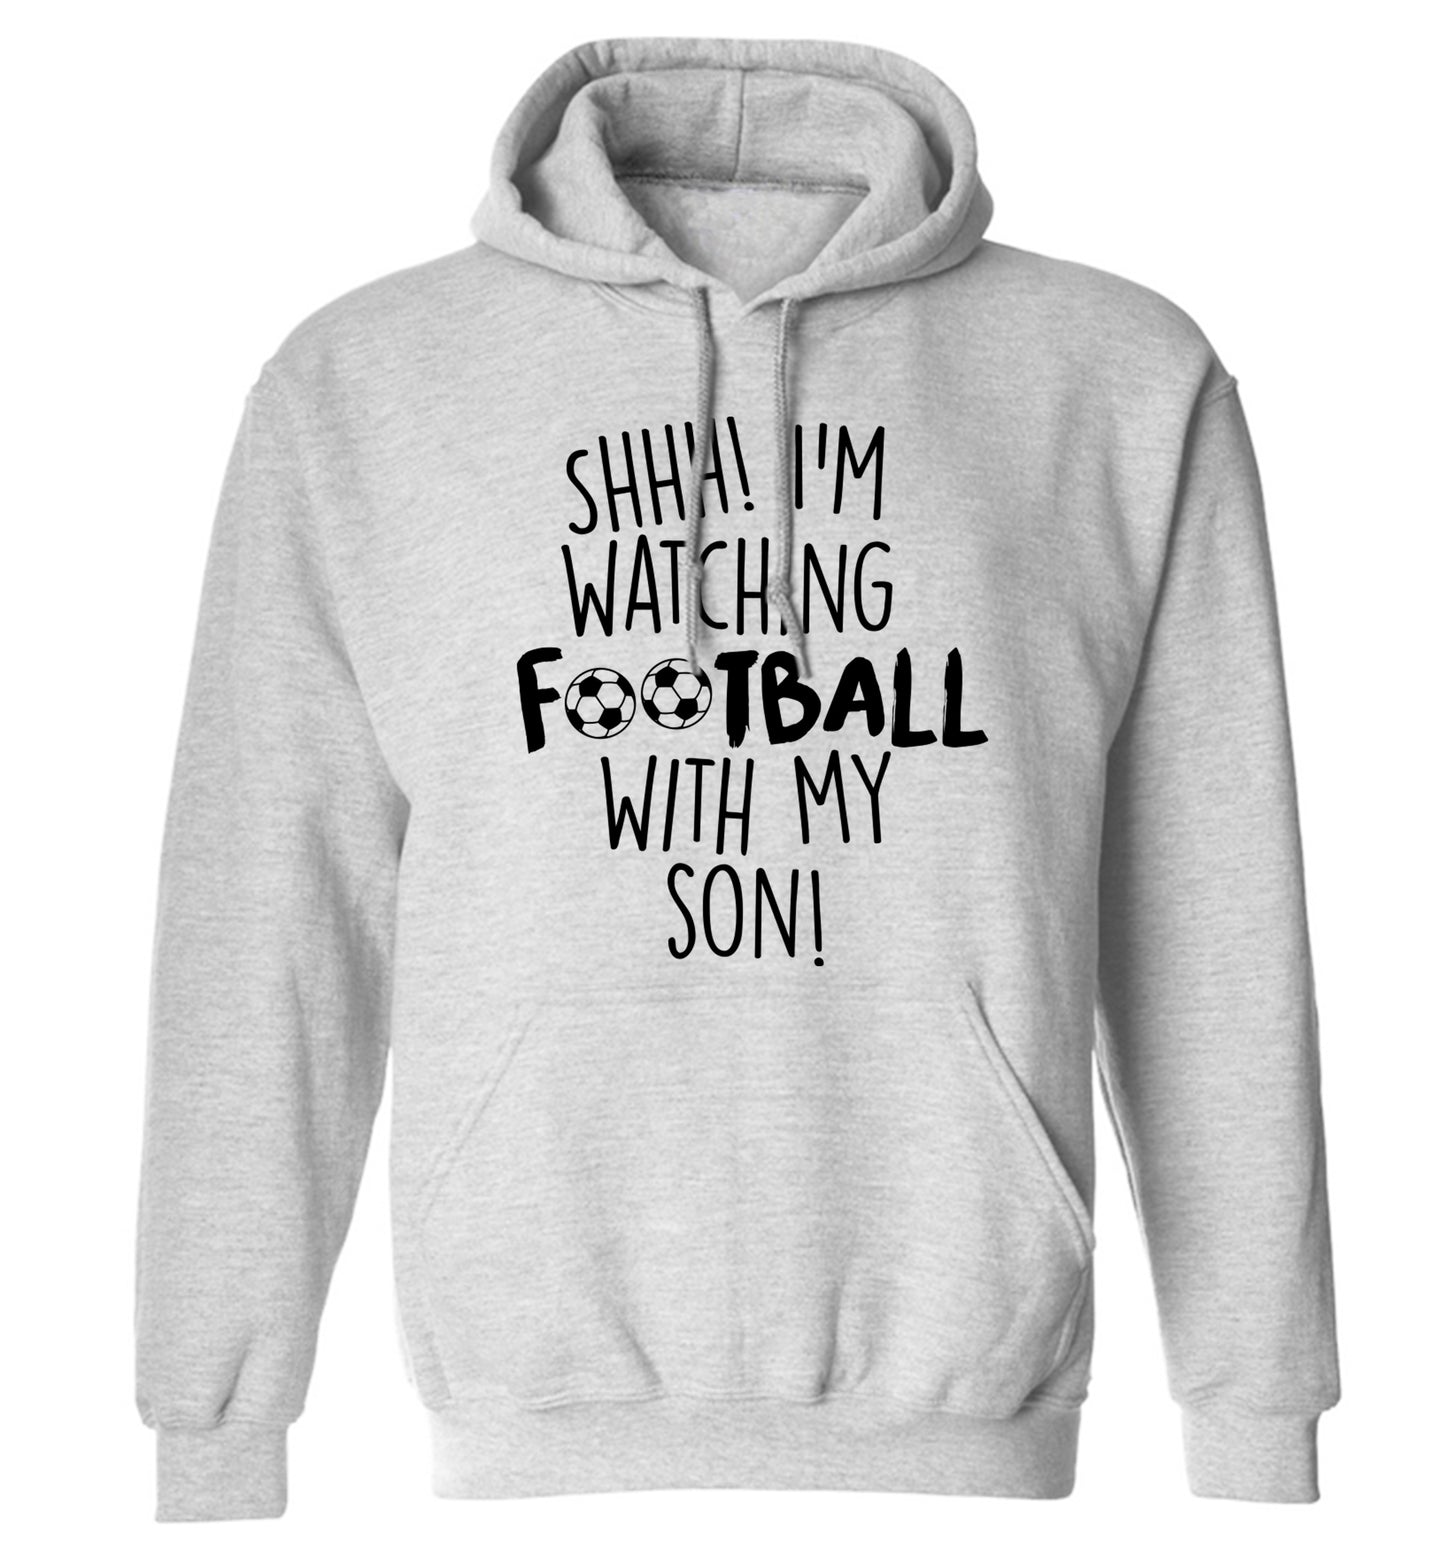 Shhh I'm watching football with my son adults unisexgrey hoodie 2XL